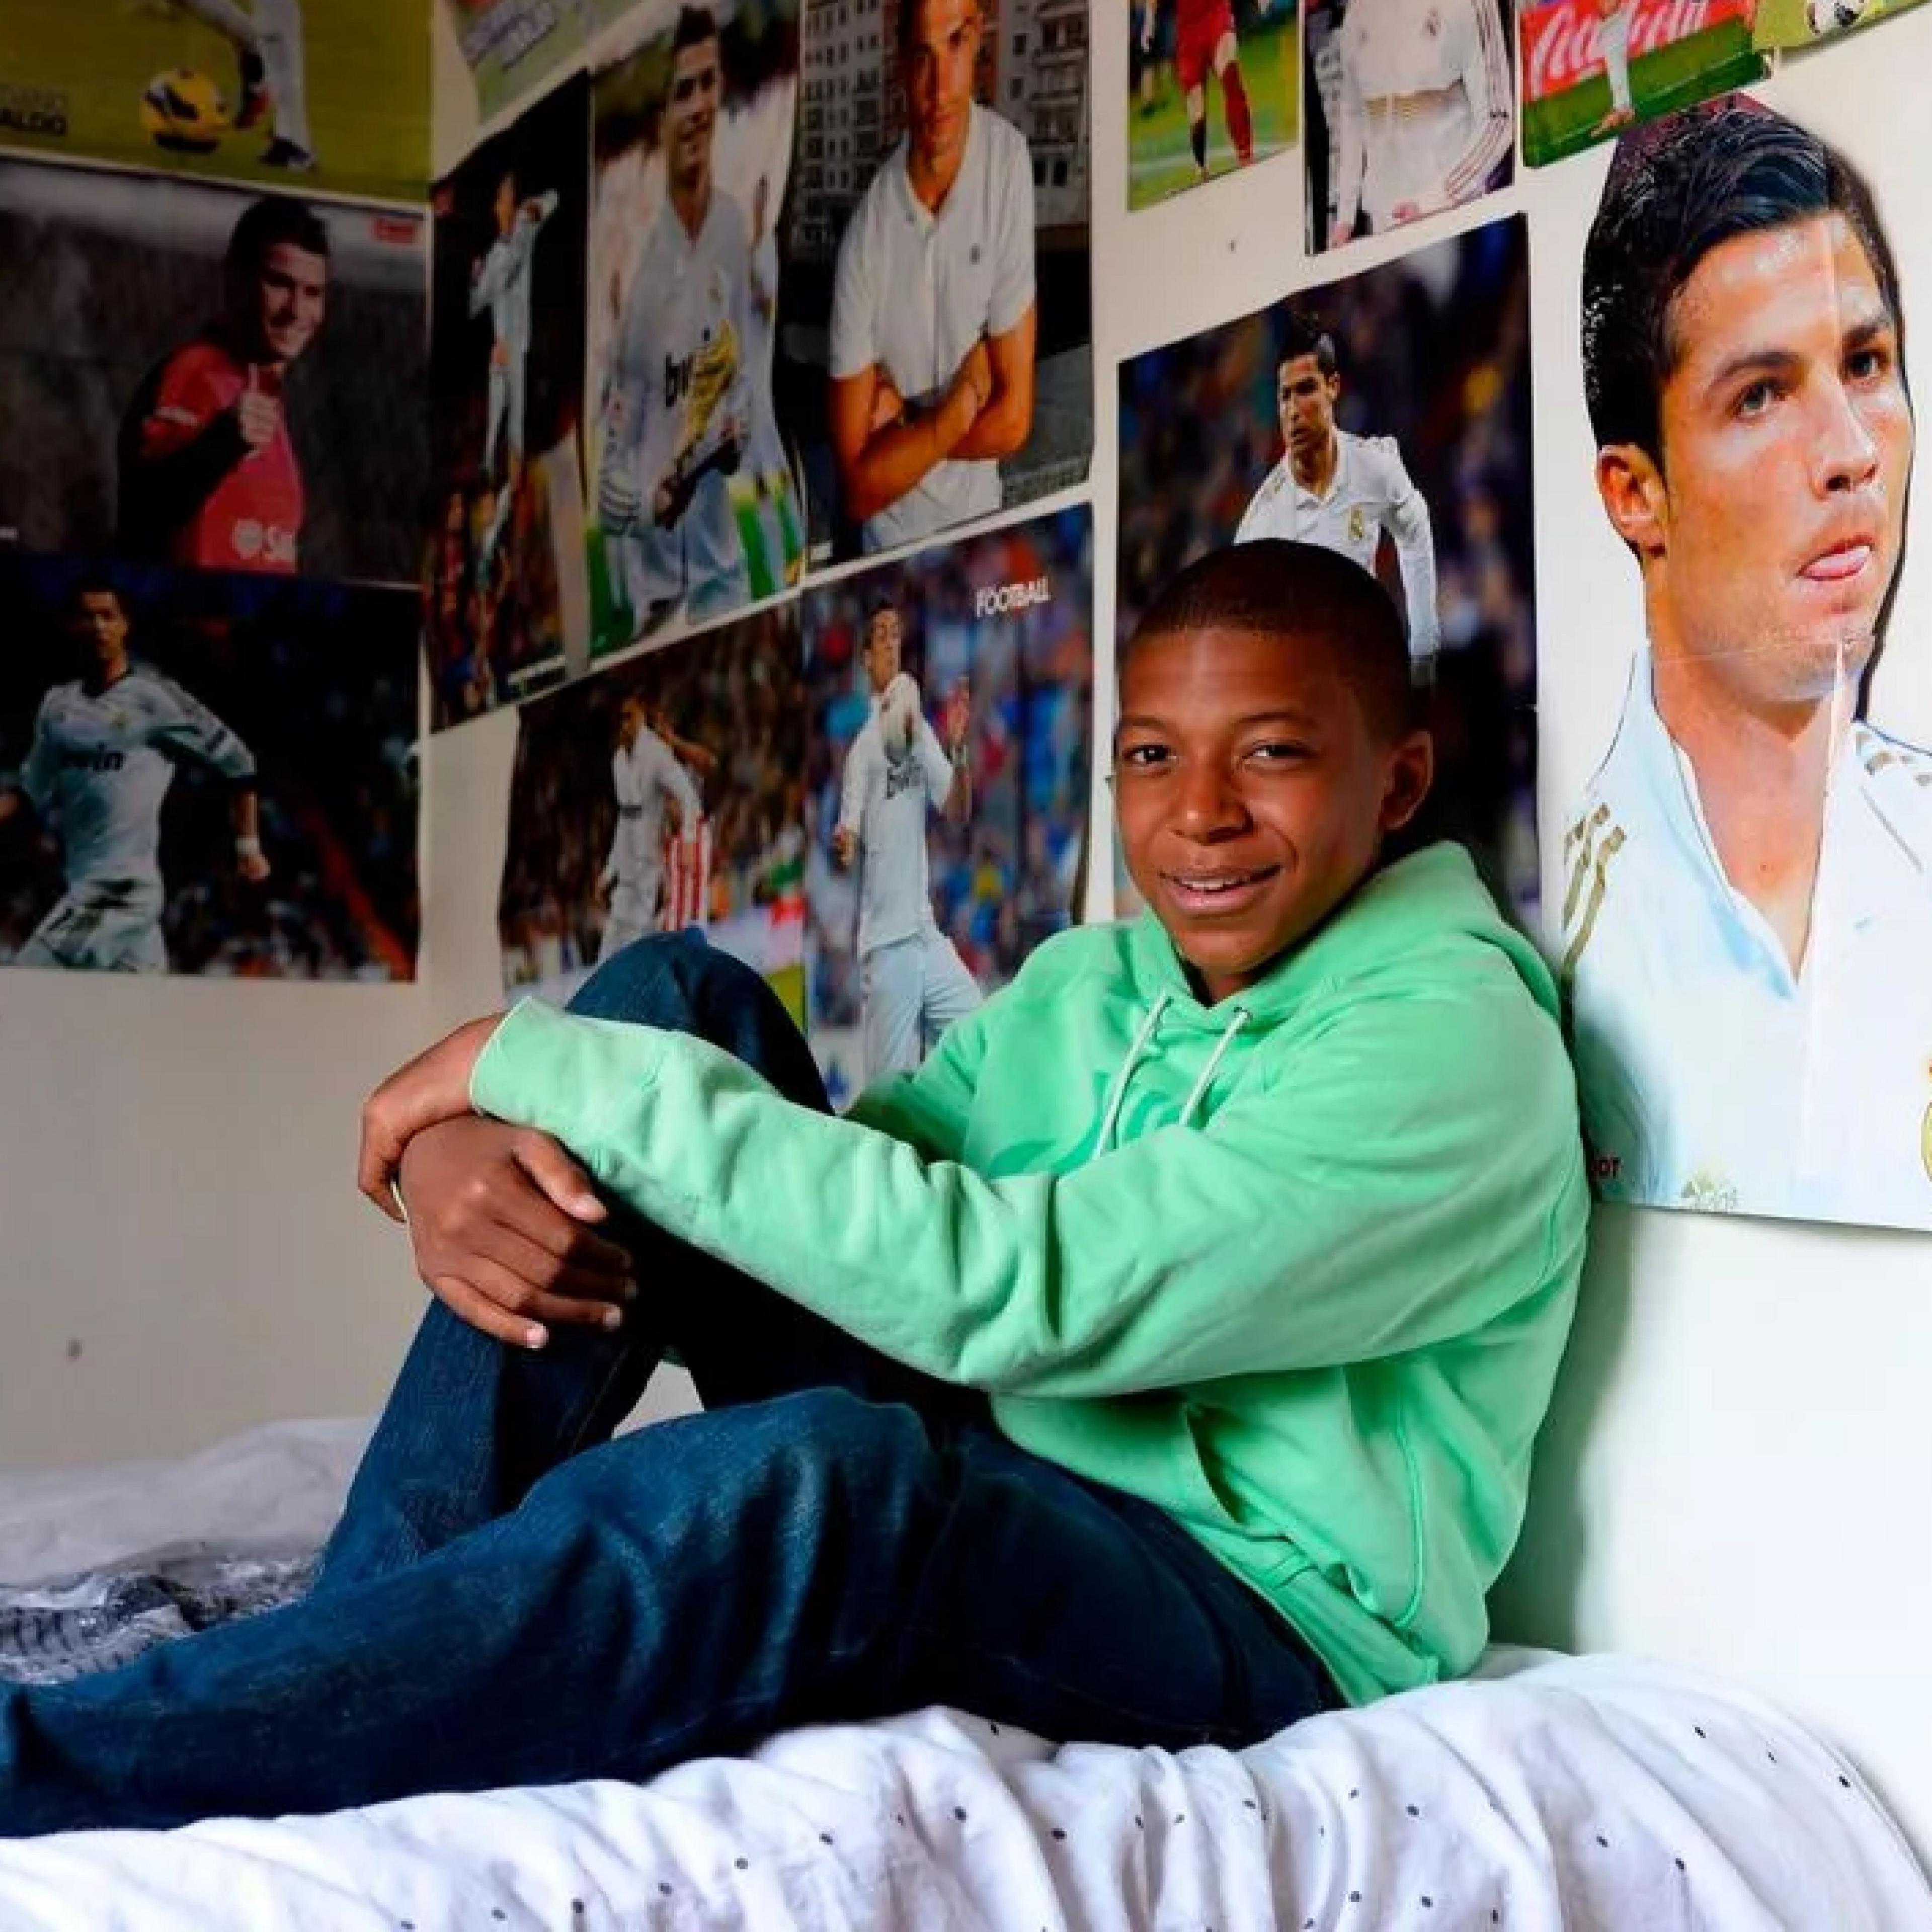 Kylian Mbappe sits on his bed with posters of Real Madrid's Cristiano Ronaldo all around him